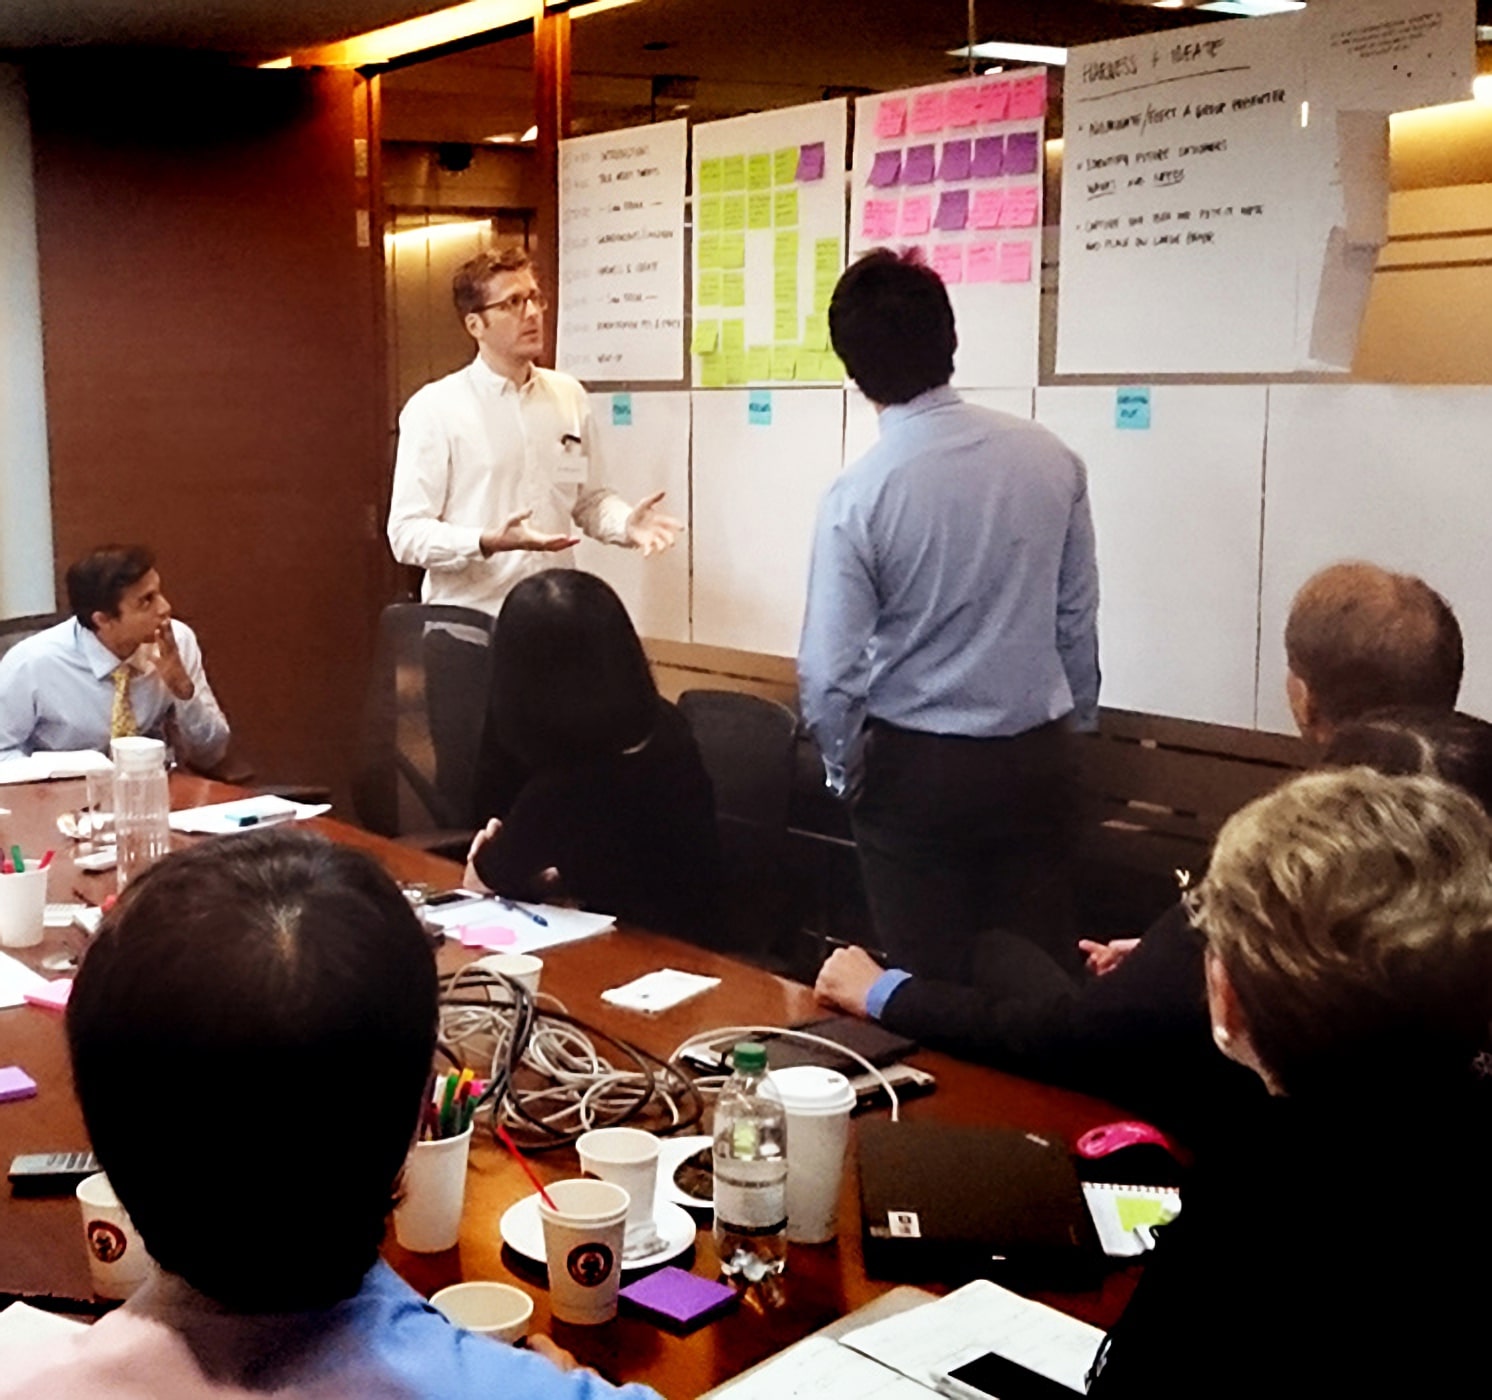 Anthony Harrison working with Manulife Executives through the service design stage